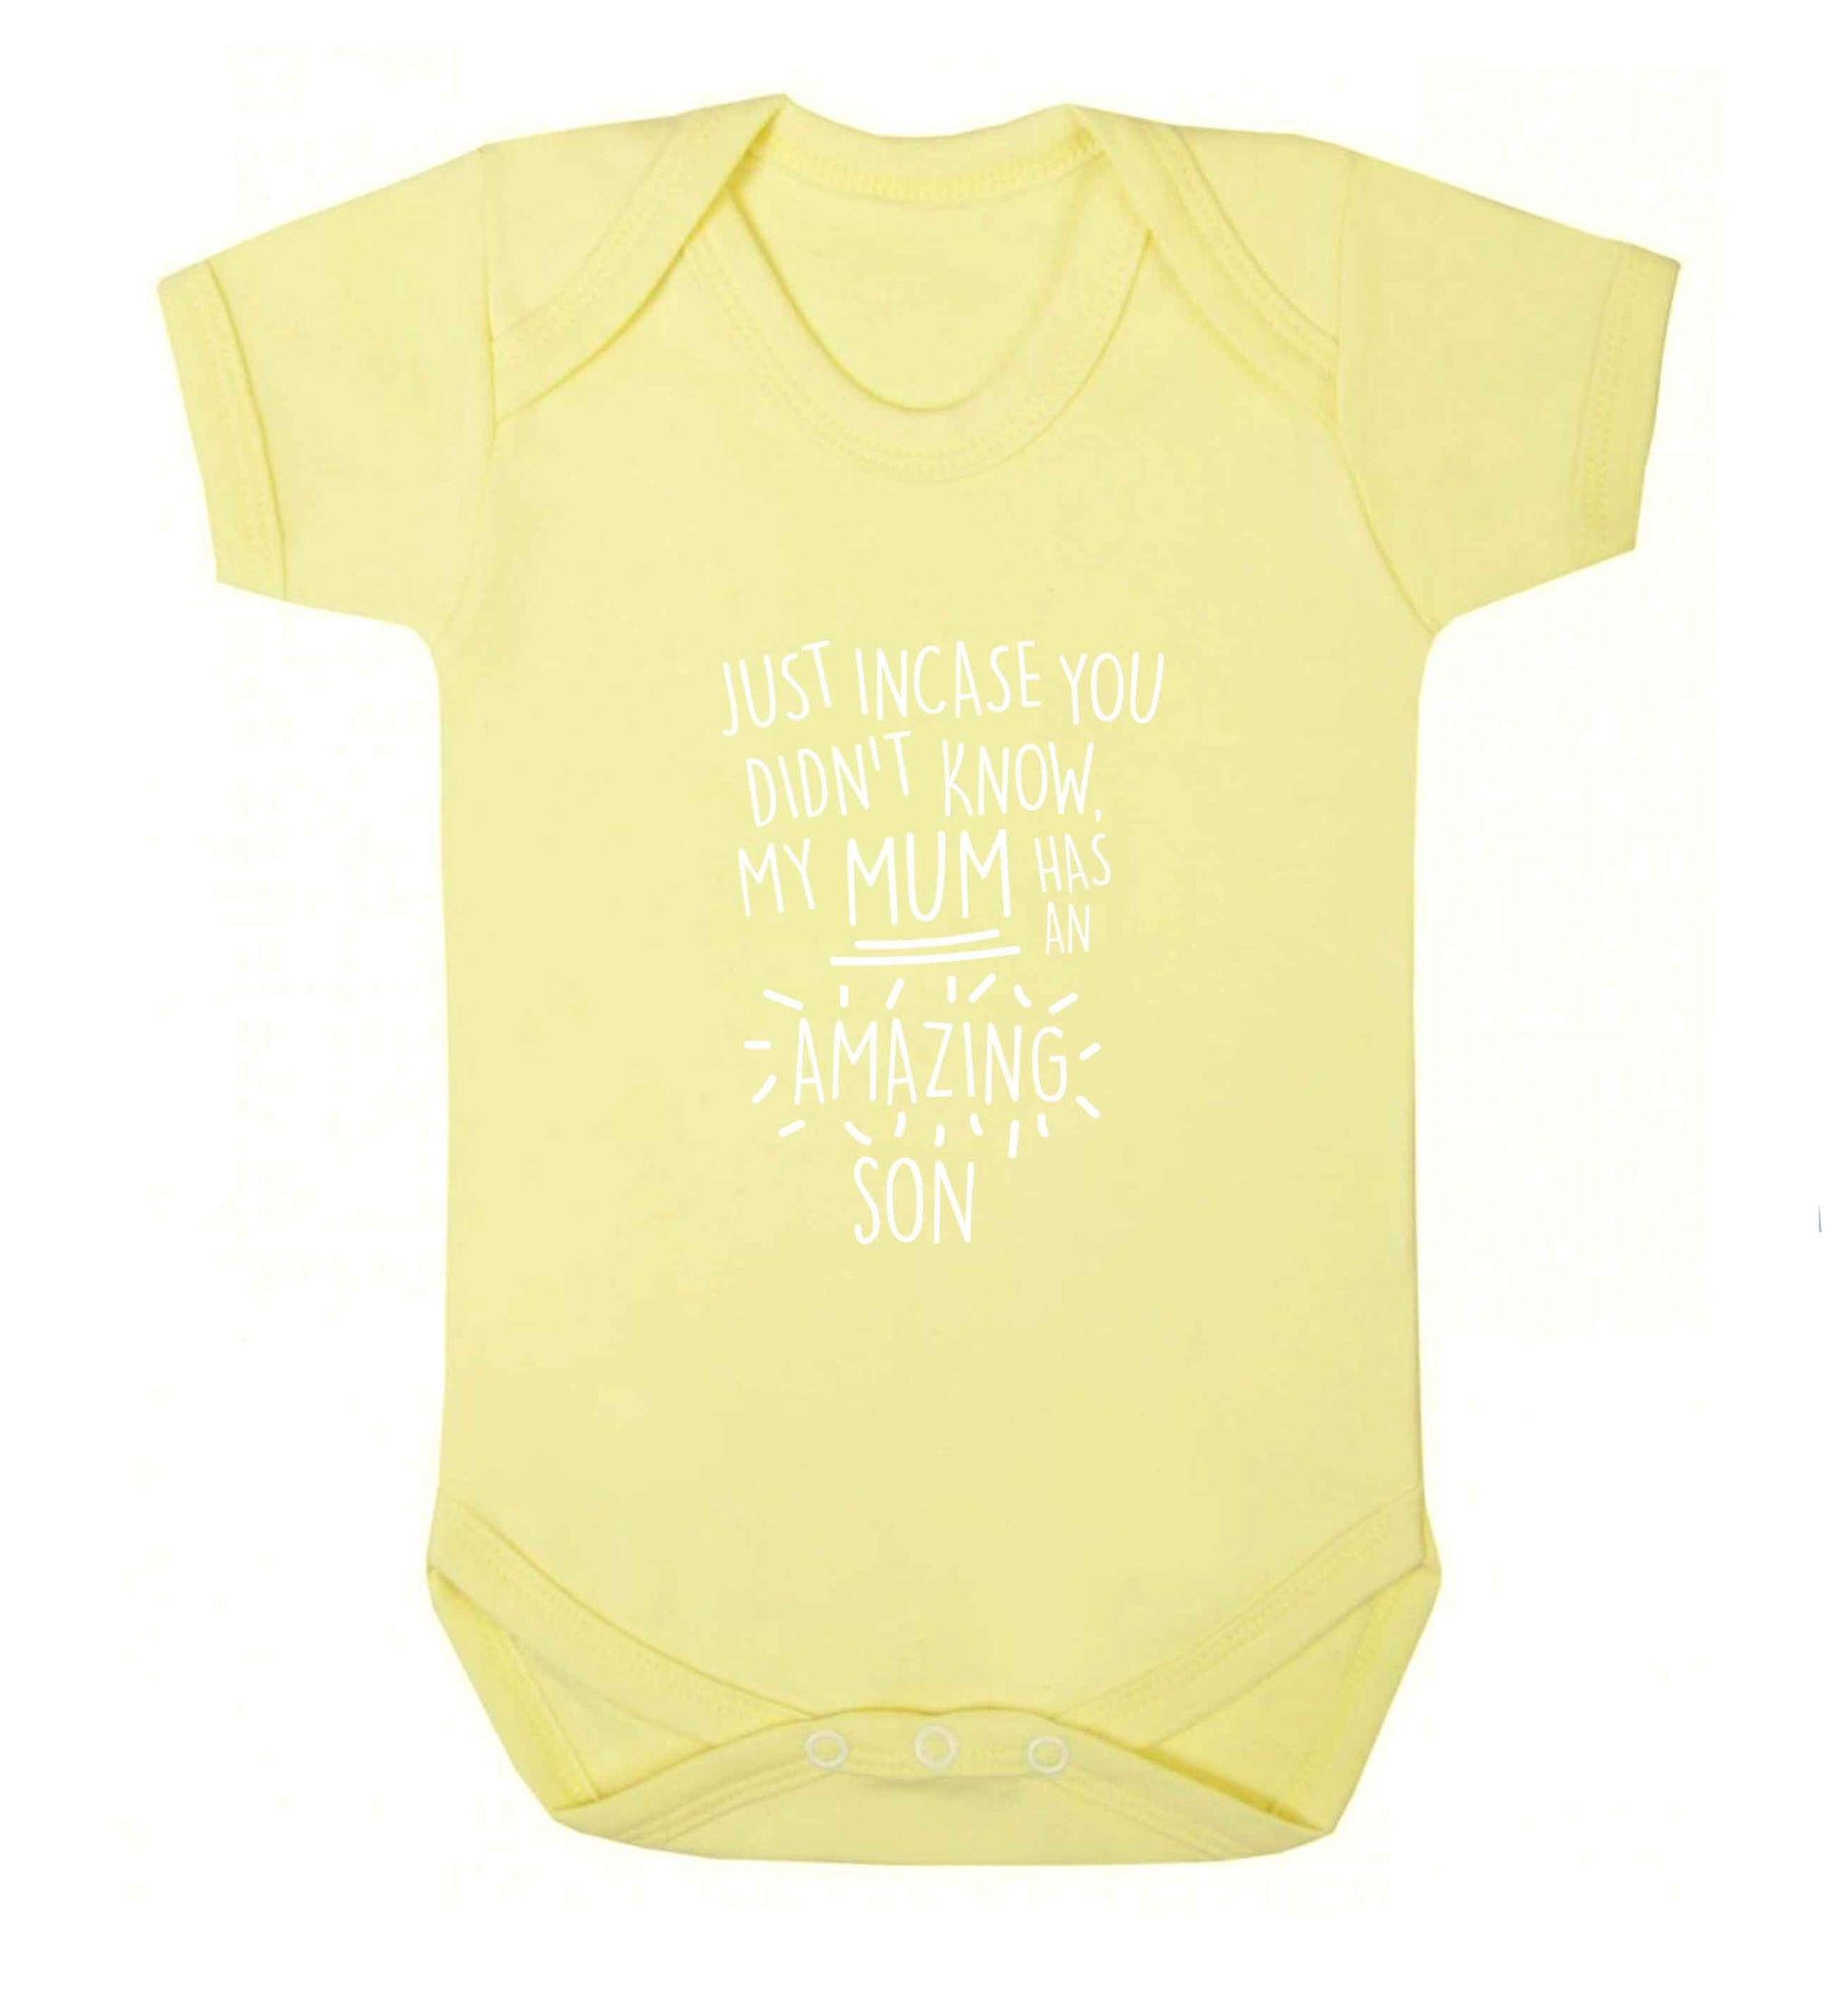 Just incase you didn't know my mum has an amazing son baby vest pale yellow 18-24 months